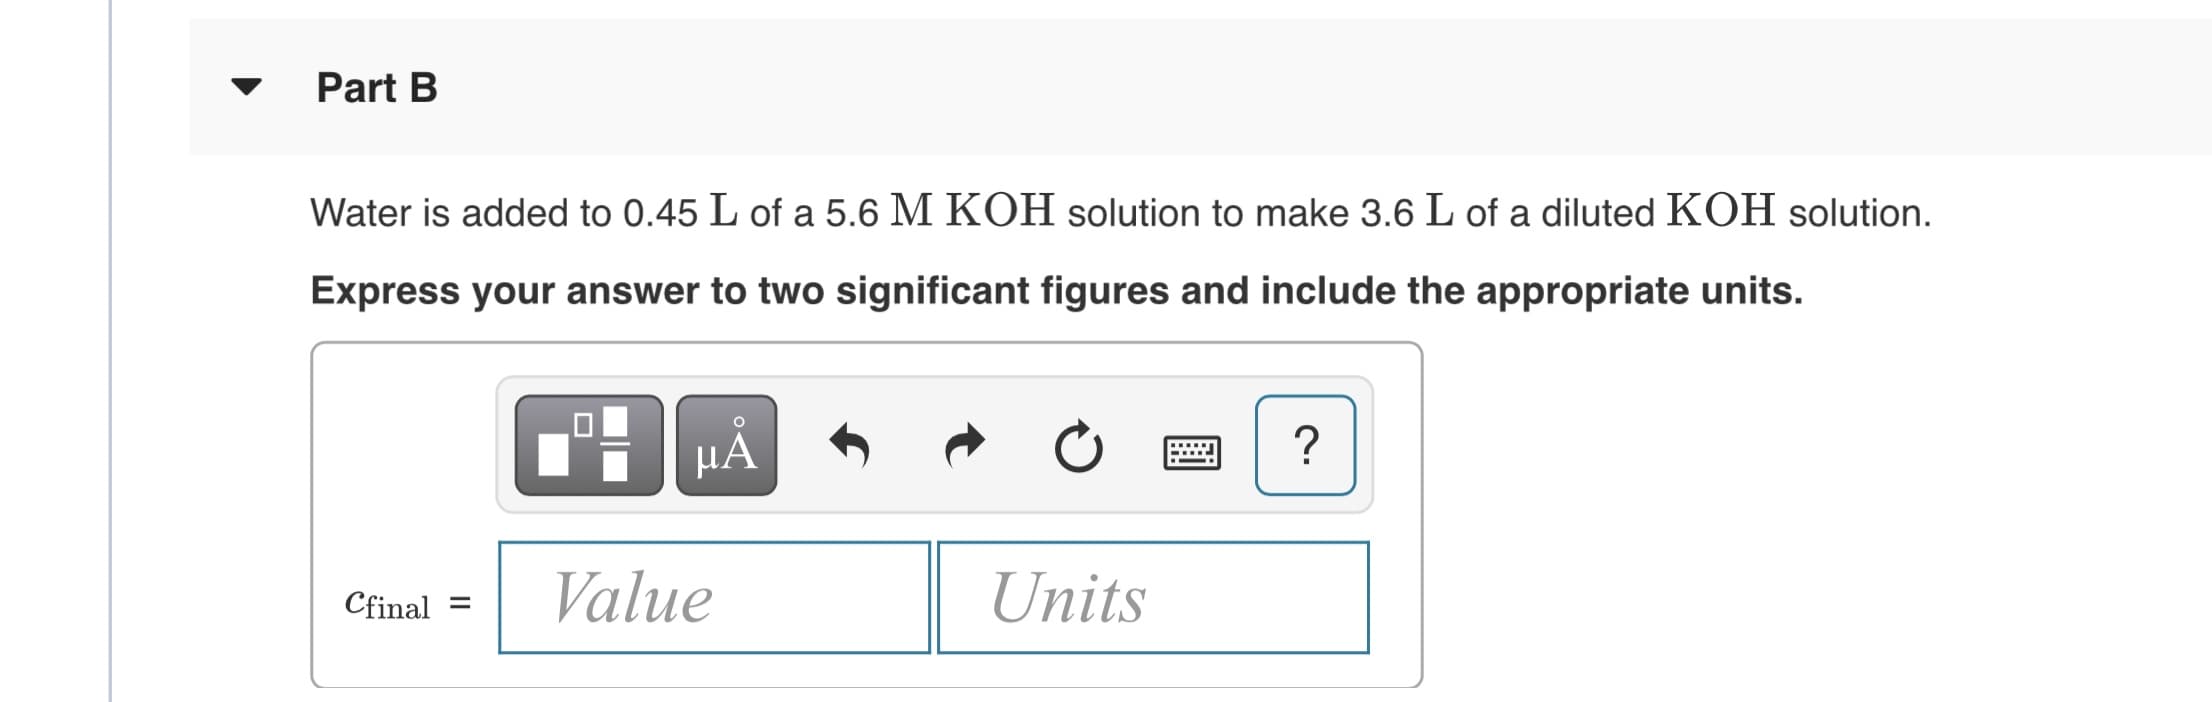 Part B
Water is added to 0.45 L of a 5.6 M KOH solution to make 3.6 L of a diluted KOH solution.
Express your answer to two significant figures and include the appropriate units.
HẢ
Value
Units
Cfinal
